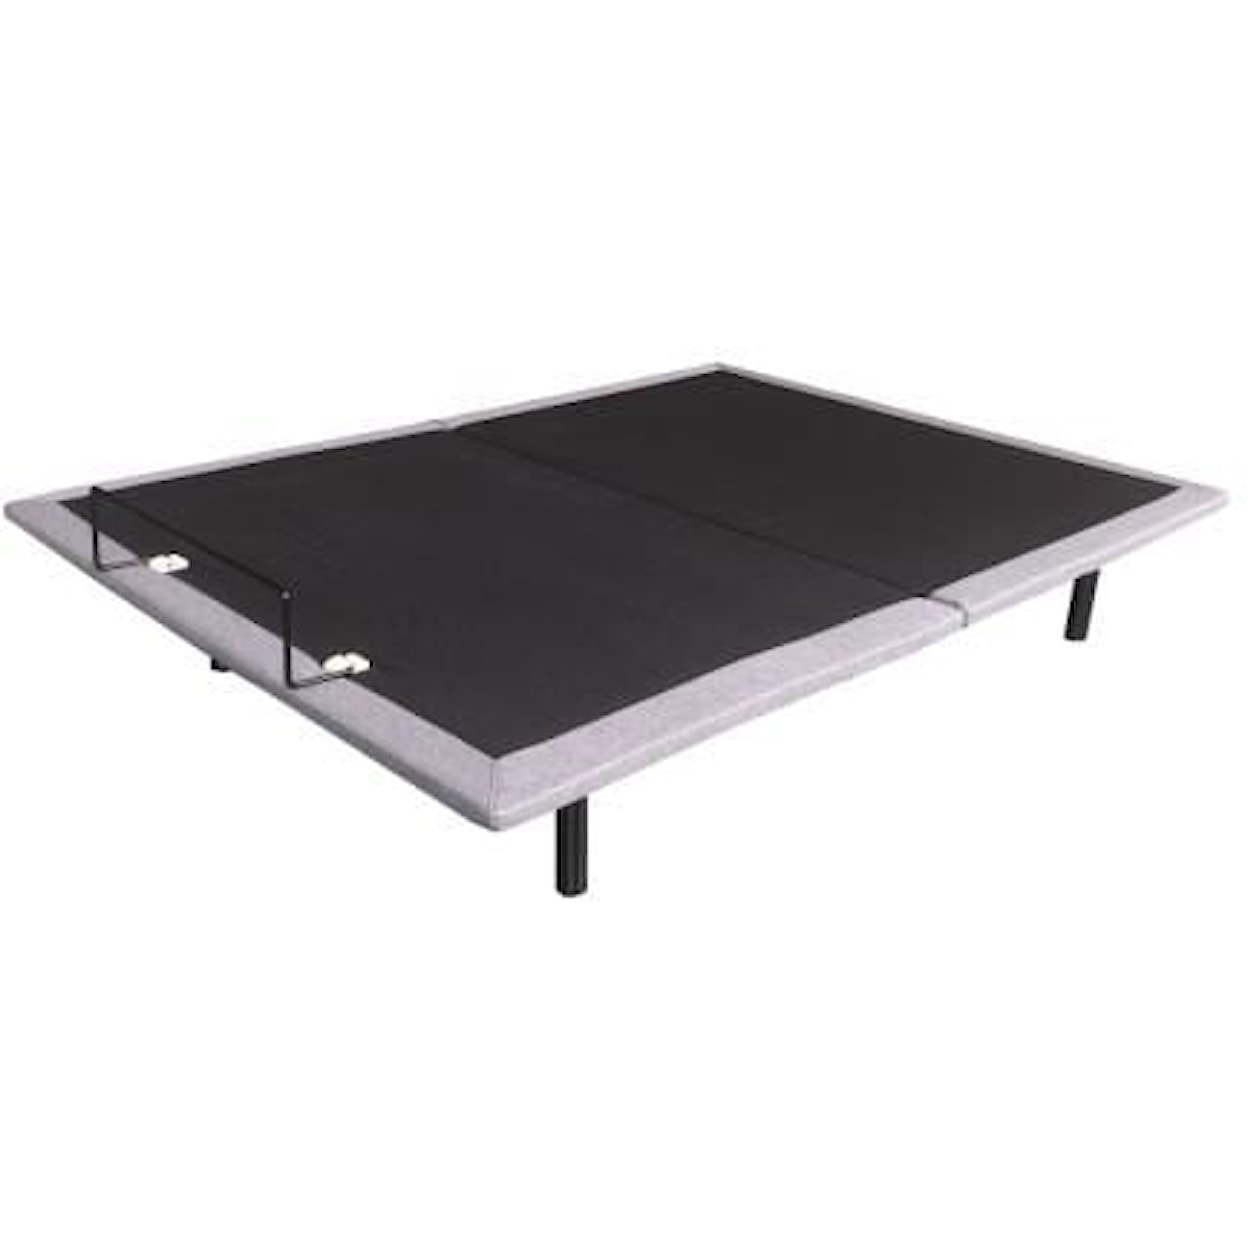 AC Pacific Snooze #2 Queen Adjustable Base